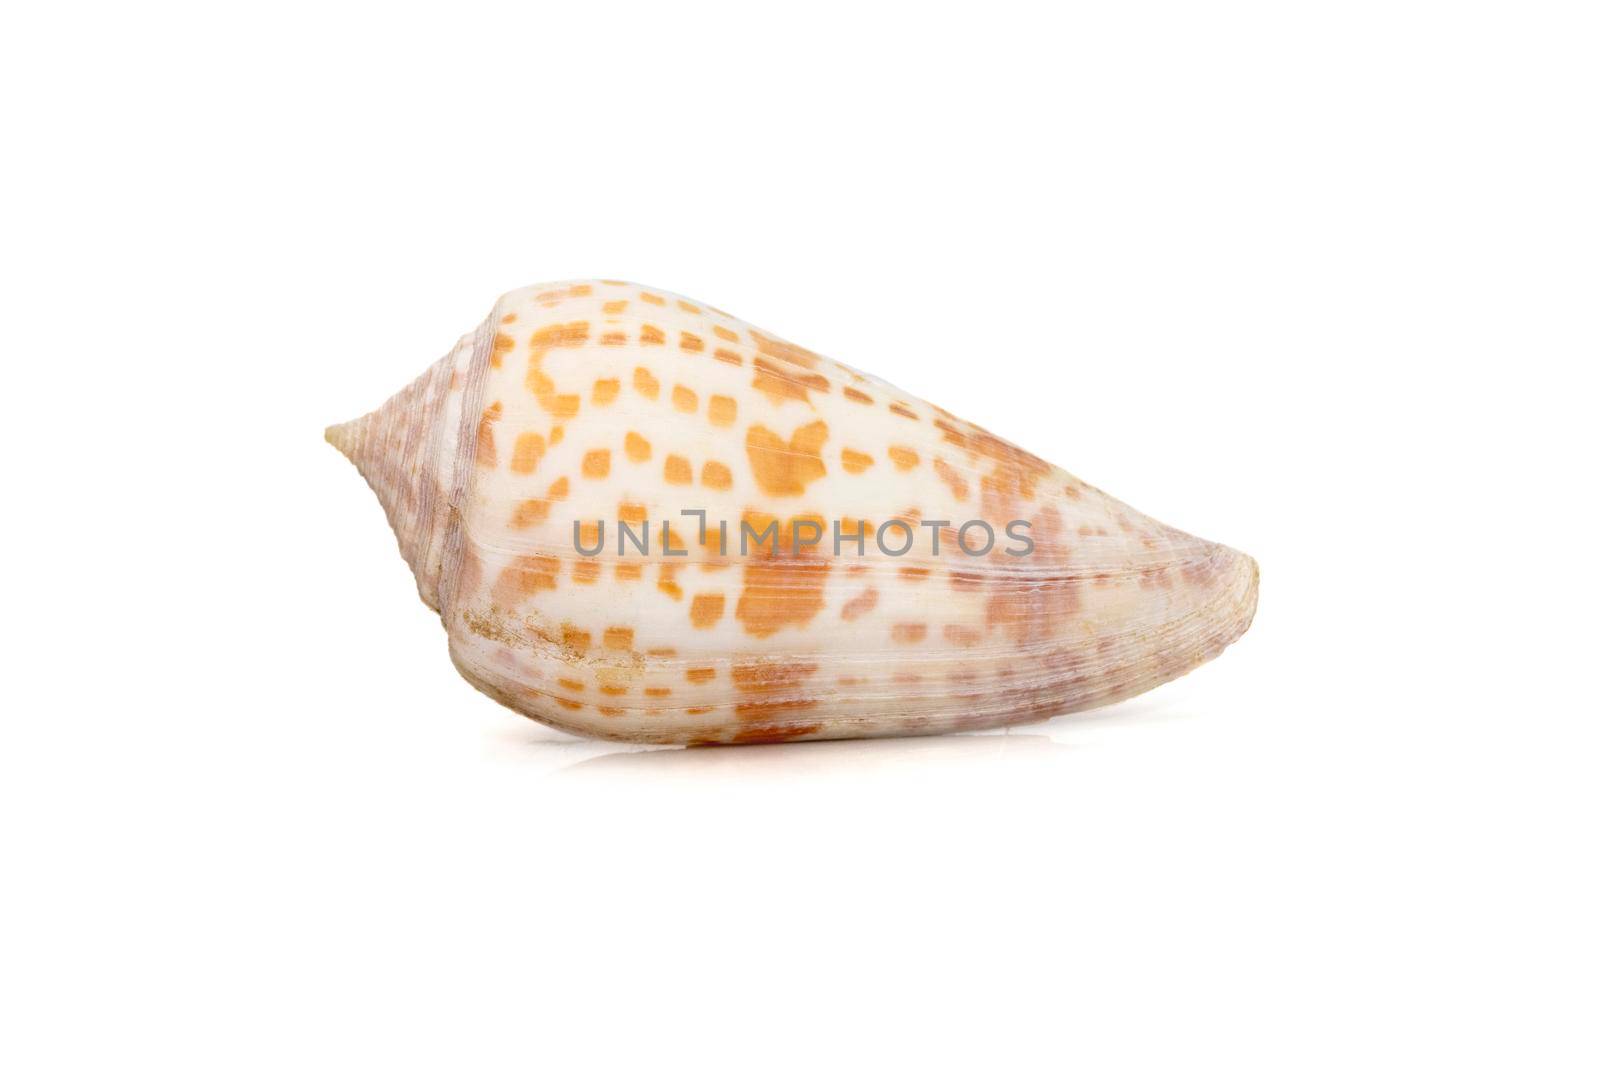 Image of conus tessulatus, common name the tessellated cone, is a species of sea snail, a marine gastropod mollusk in the family Conidae. Undersea Animals. Sea Shells. by yod67